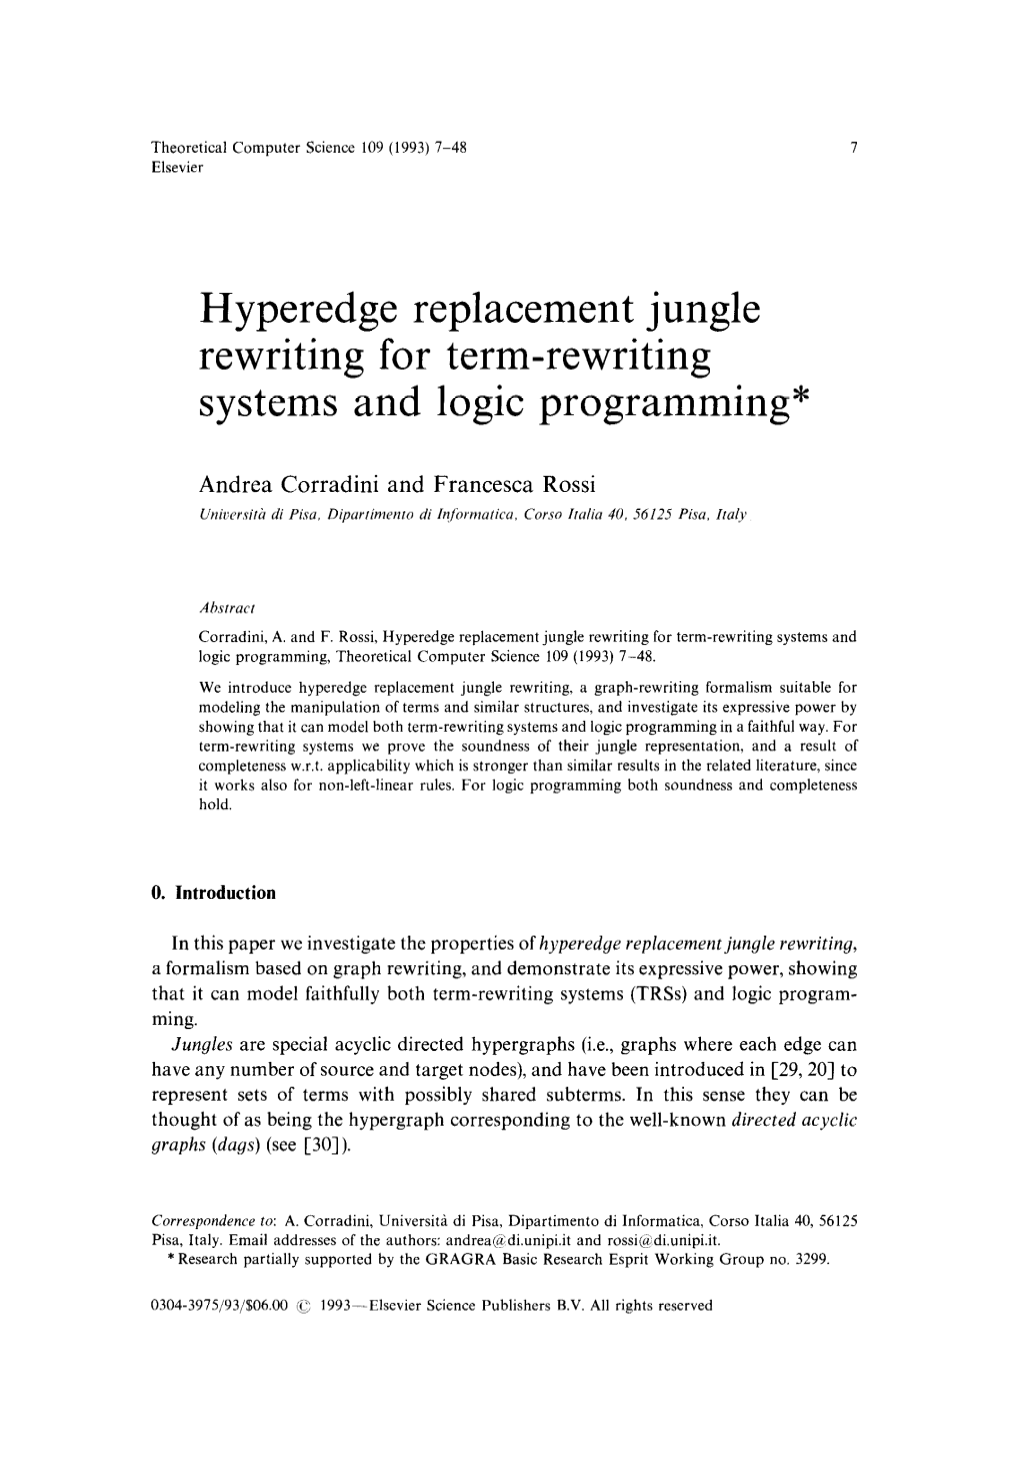 Hyperedge Replacement Jungle Rewriting for Term-Rewriting Systems and Logic Programming*